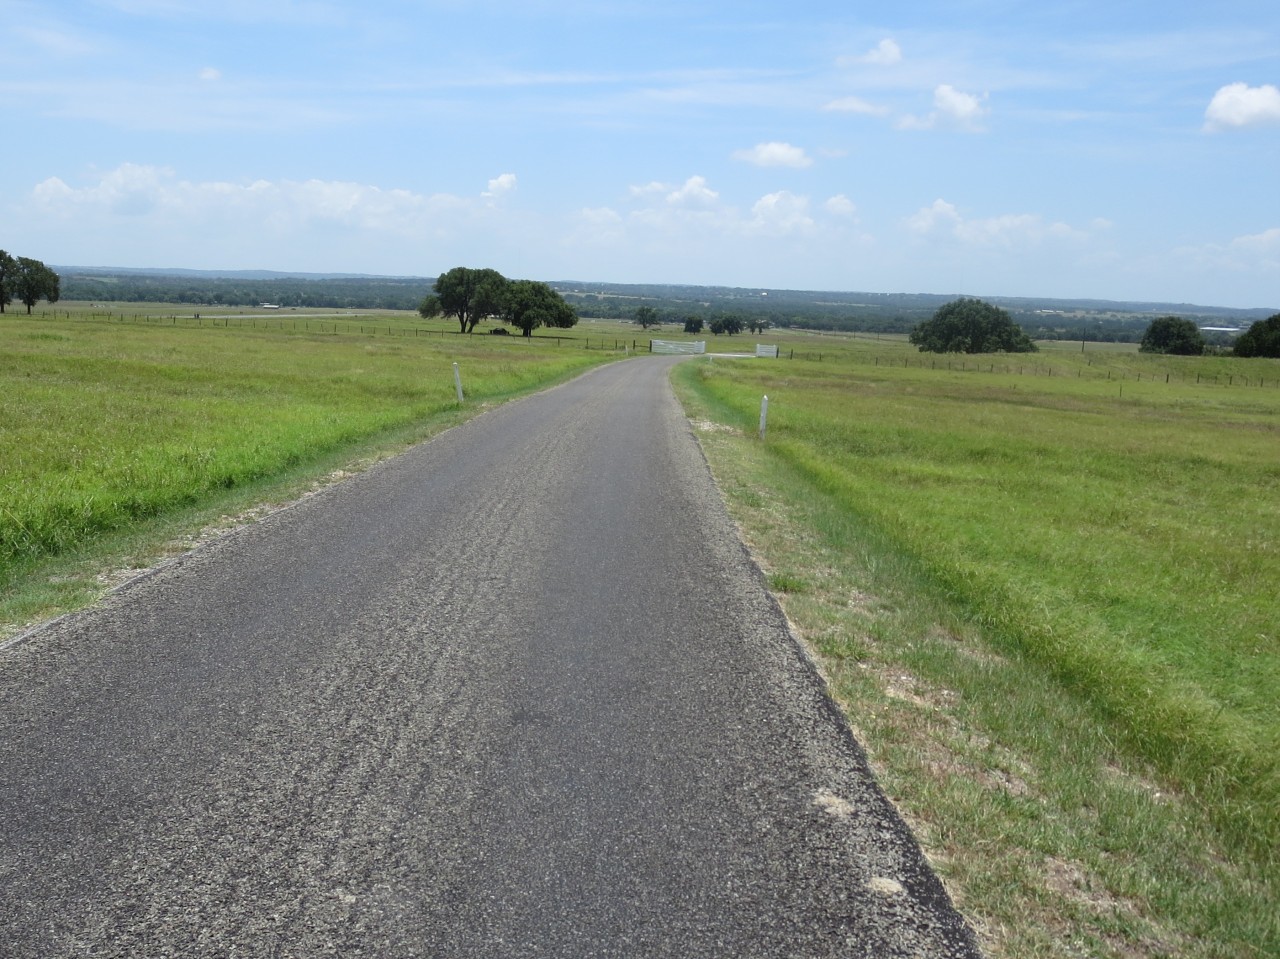 View to the south from the LBJ ranch.